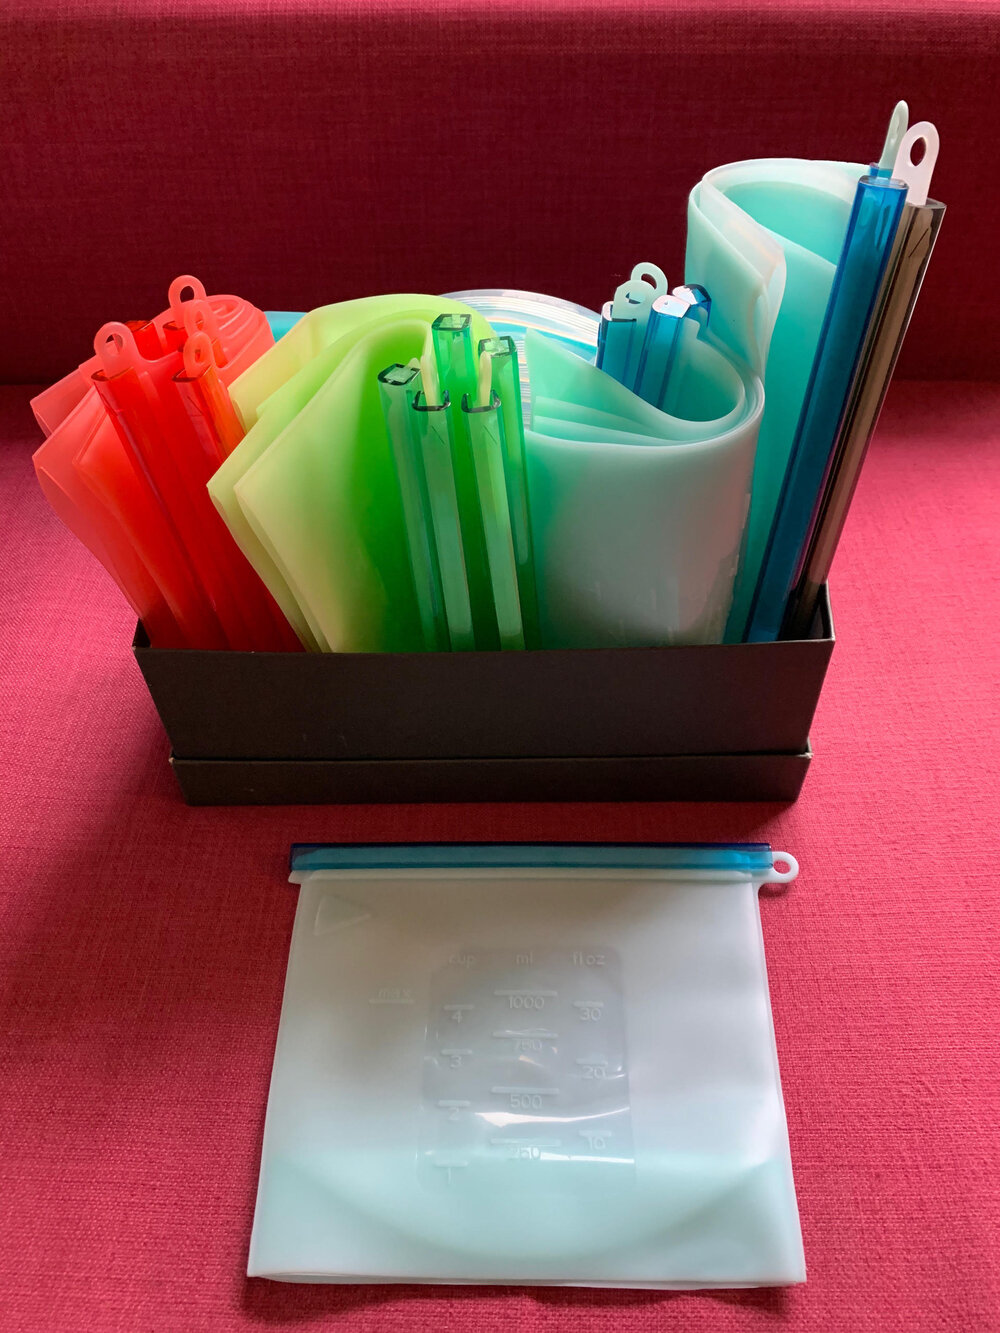 4. Silicone Bags for Food Storage